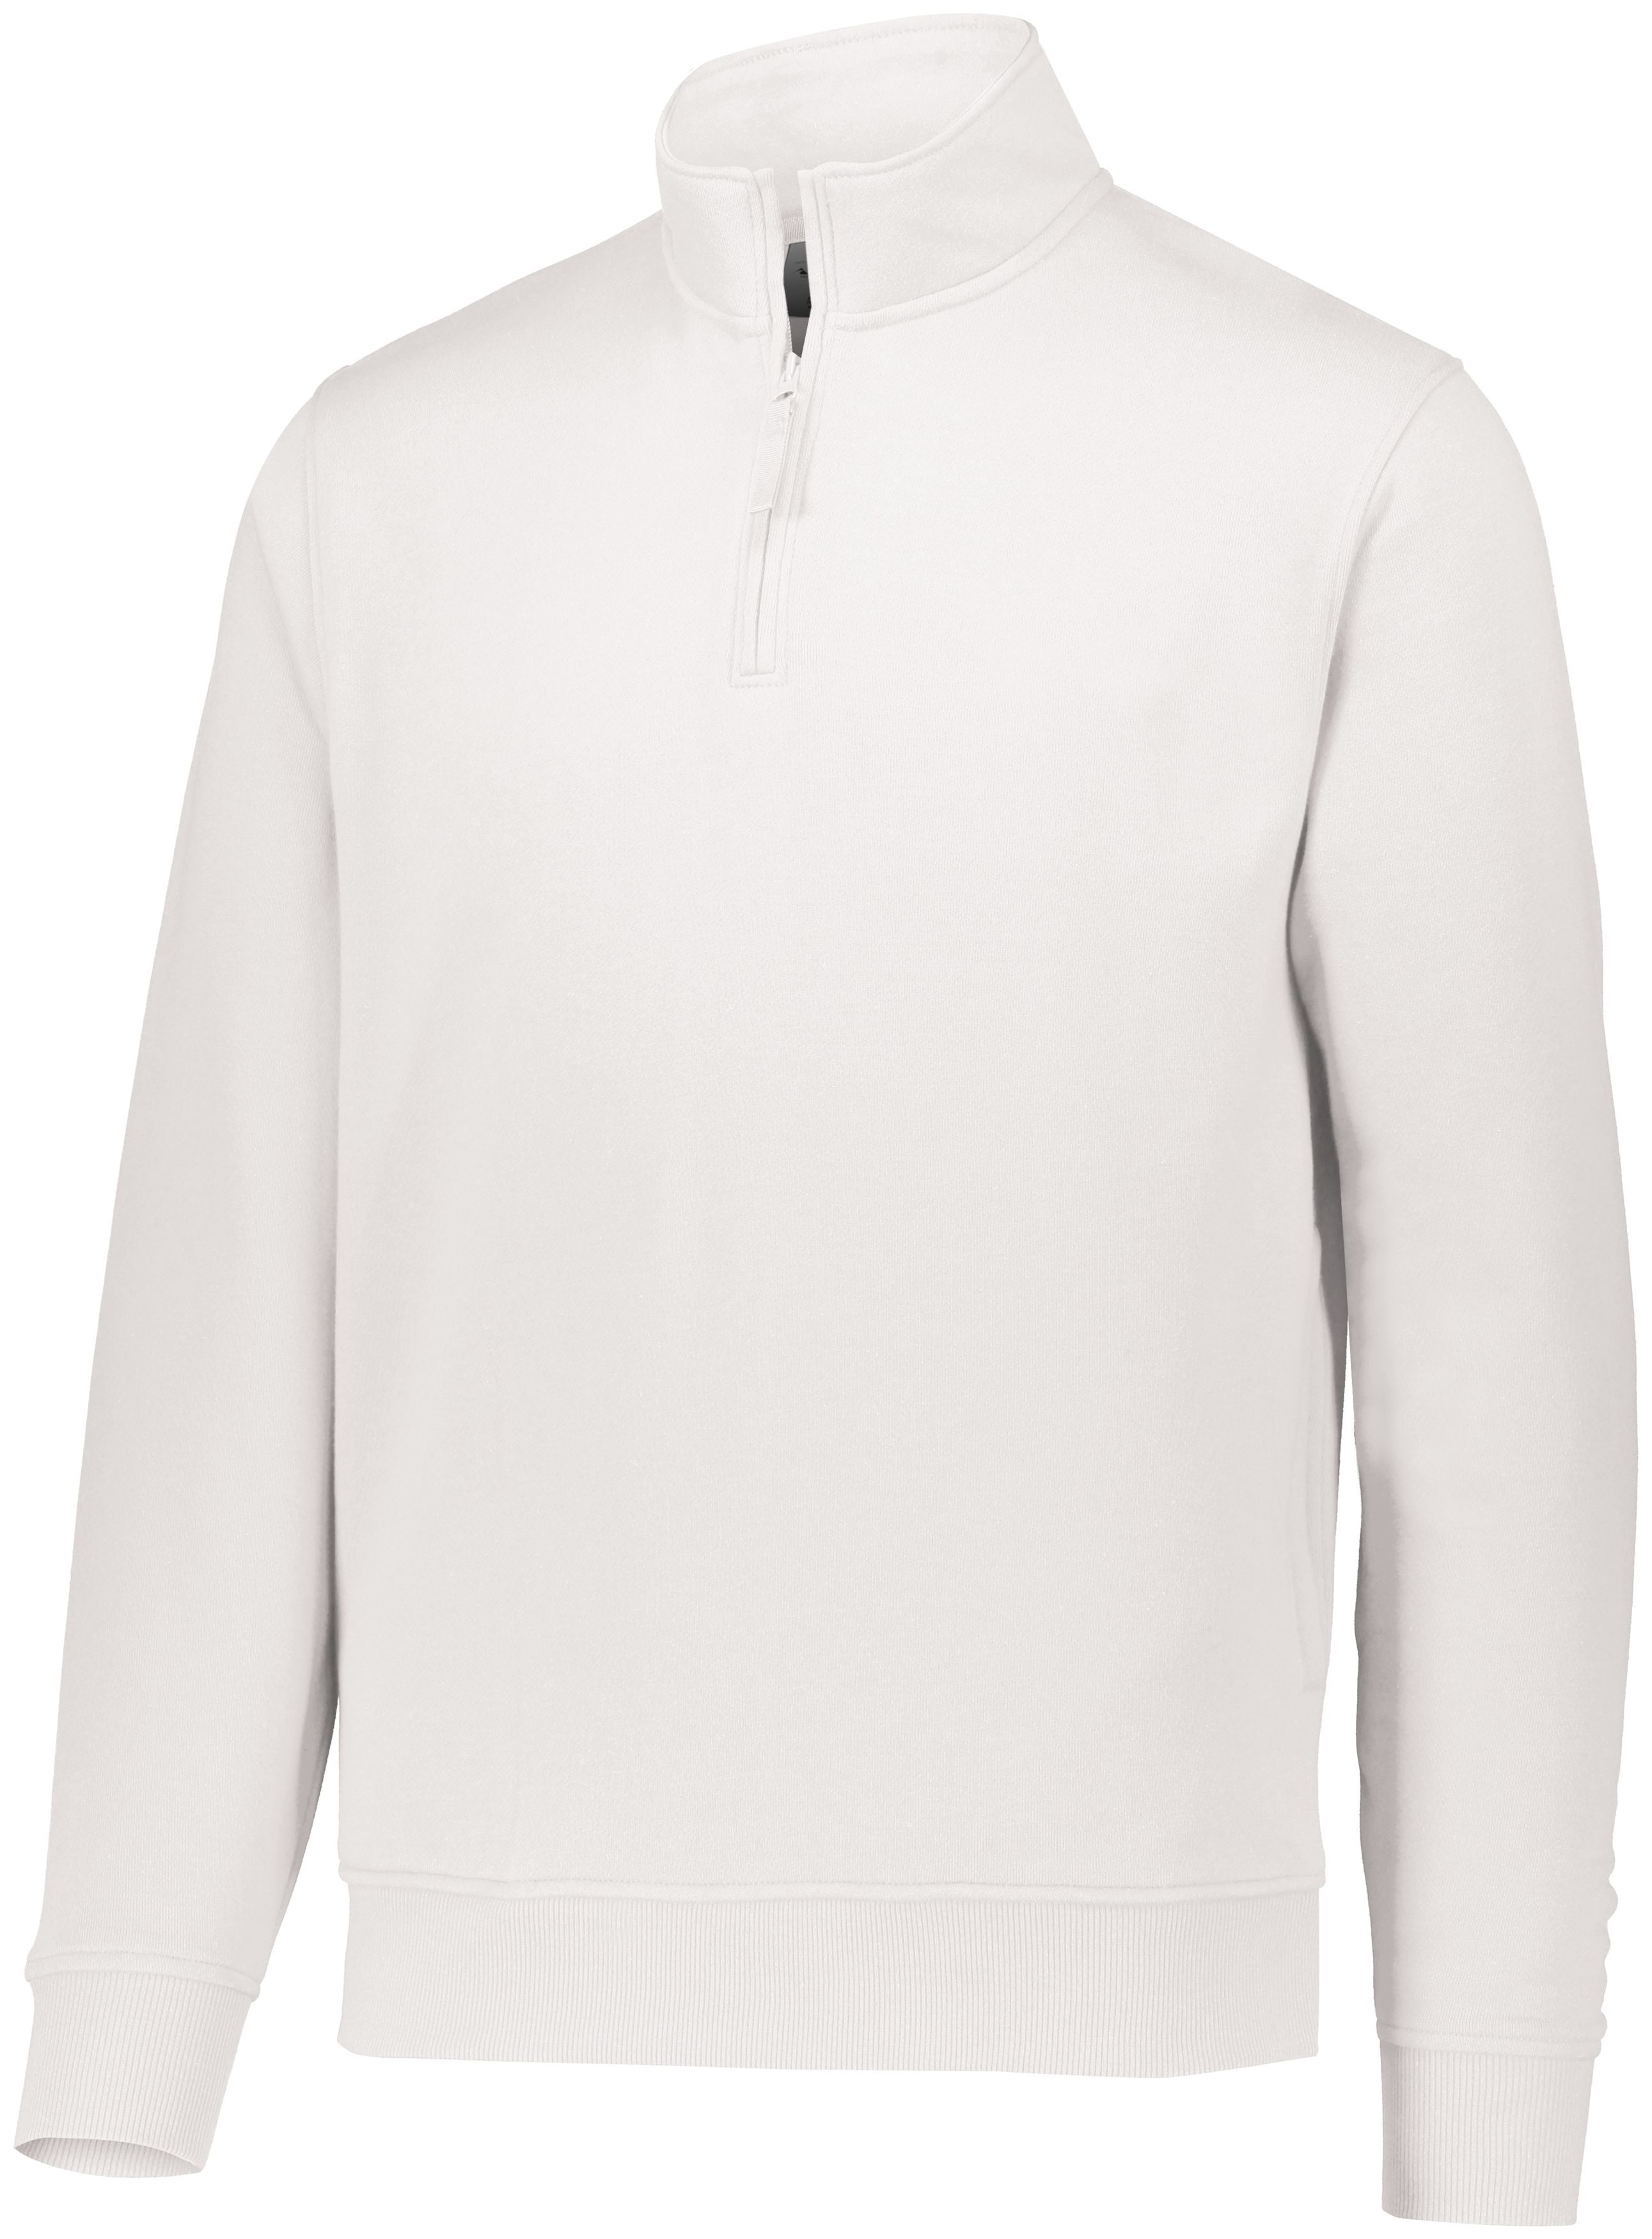 Augusta Sportswear 60/40 Fleece Pullover in White  -Part of the Adult, Adult-Pullover, Augusta-Products, Outerwear product lines at KanaleyCreations.com